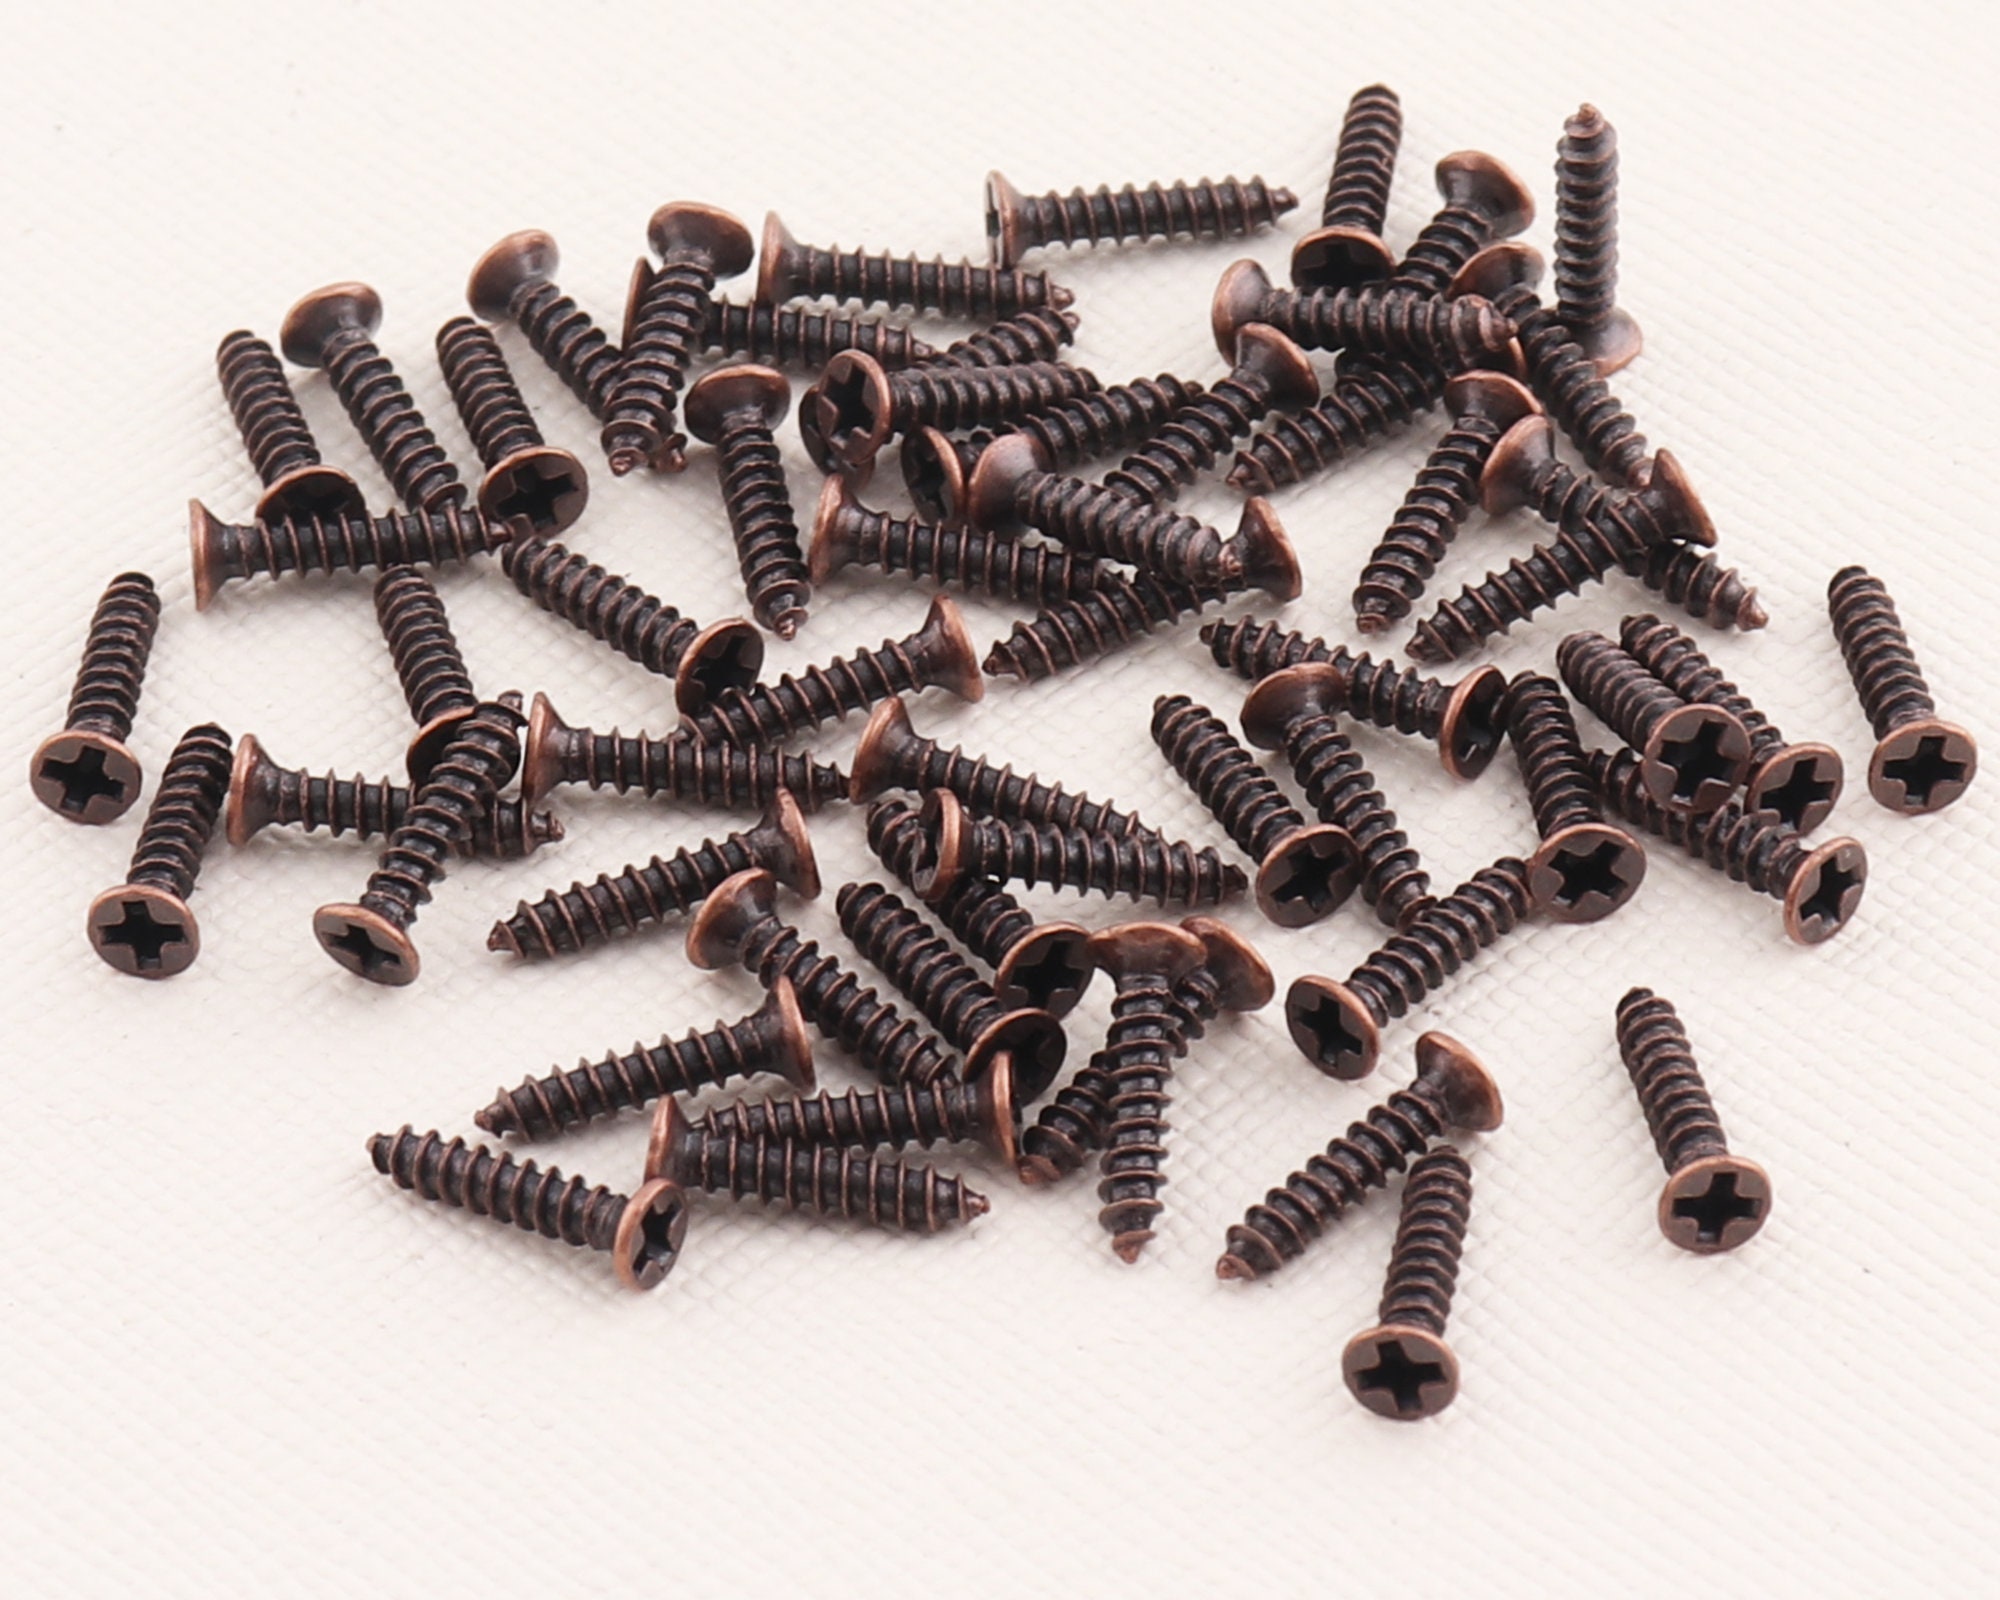 MICRO SCREW EYES - SCREW PRODUCTS - INSTALLATION ITEMS